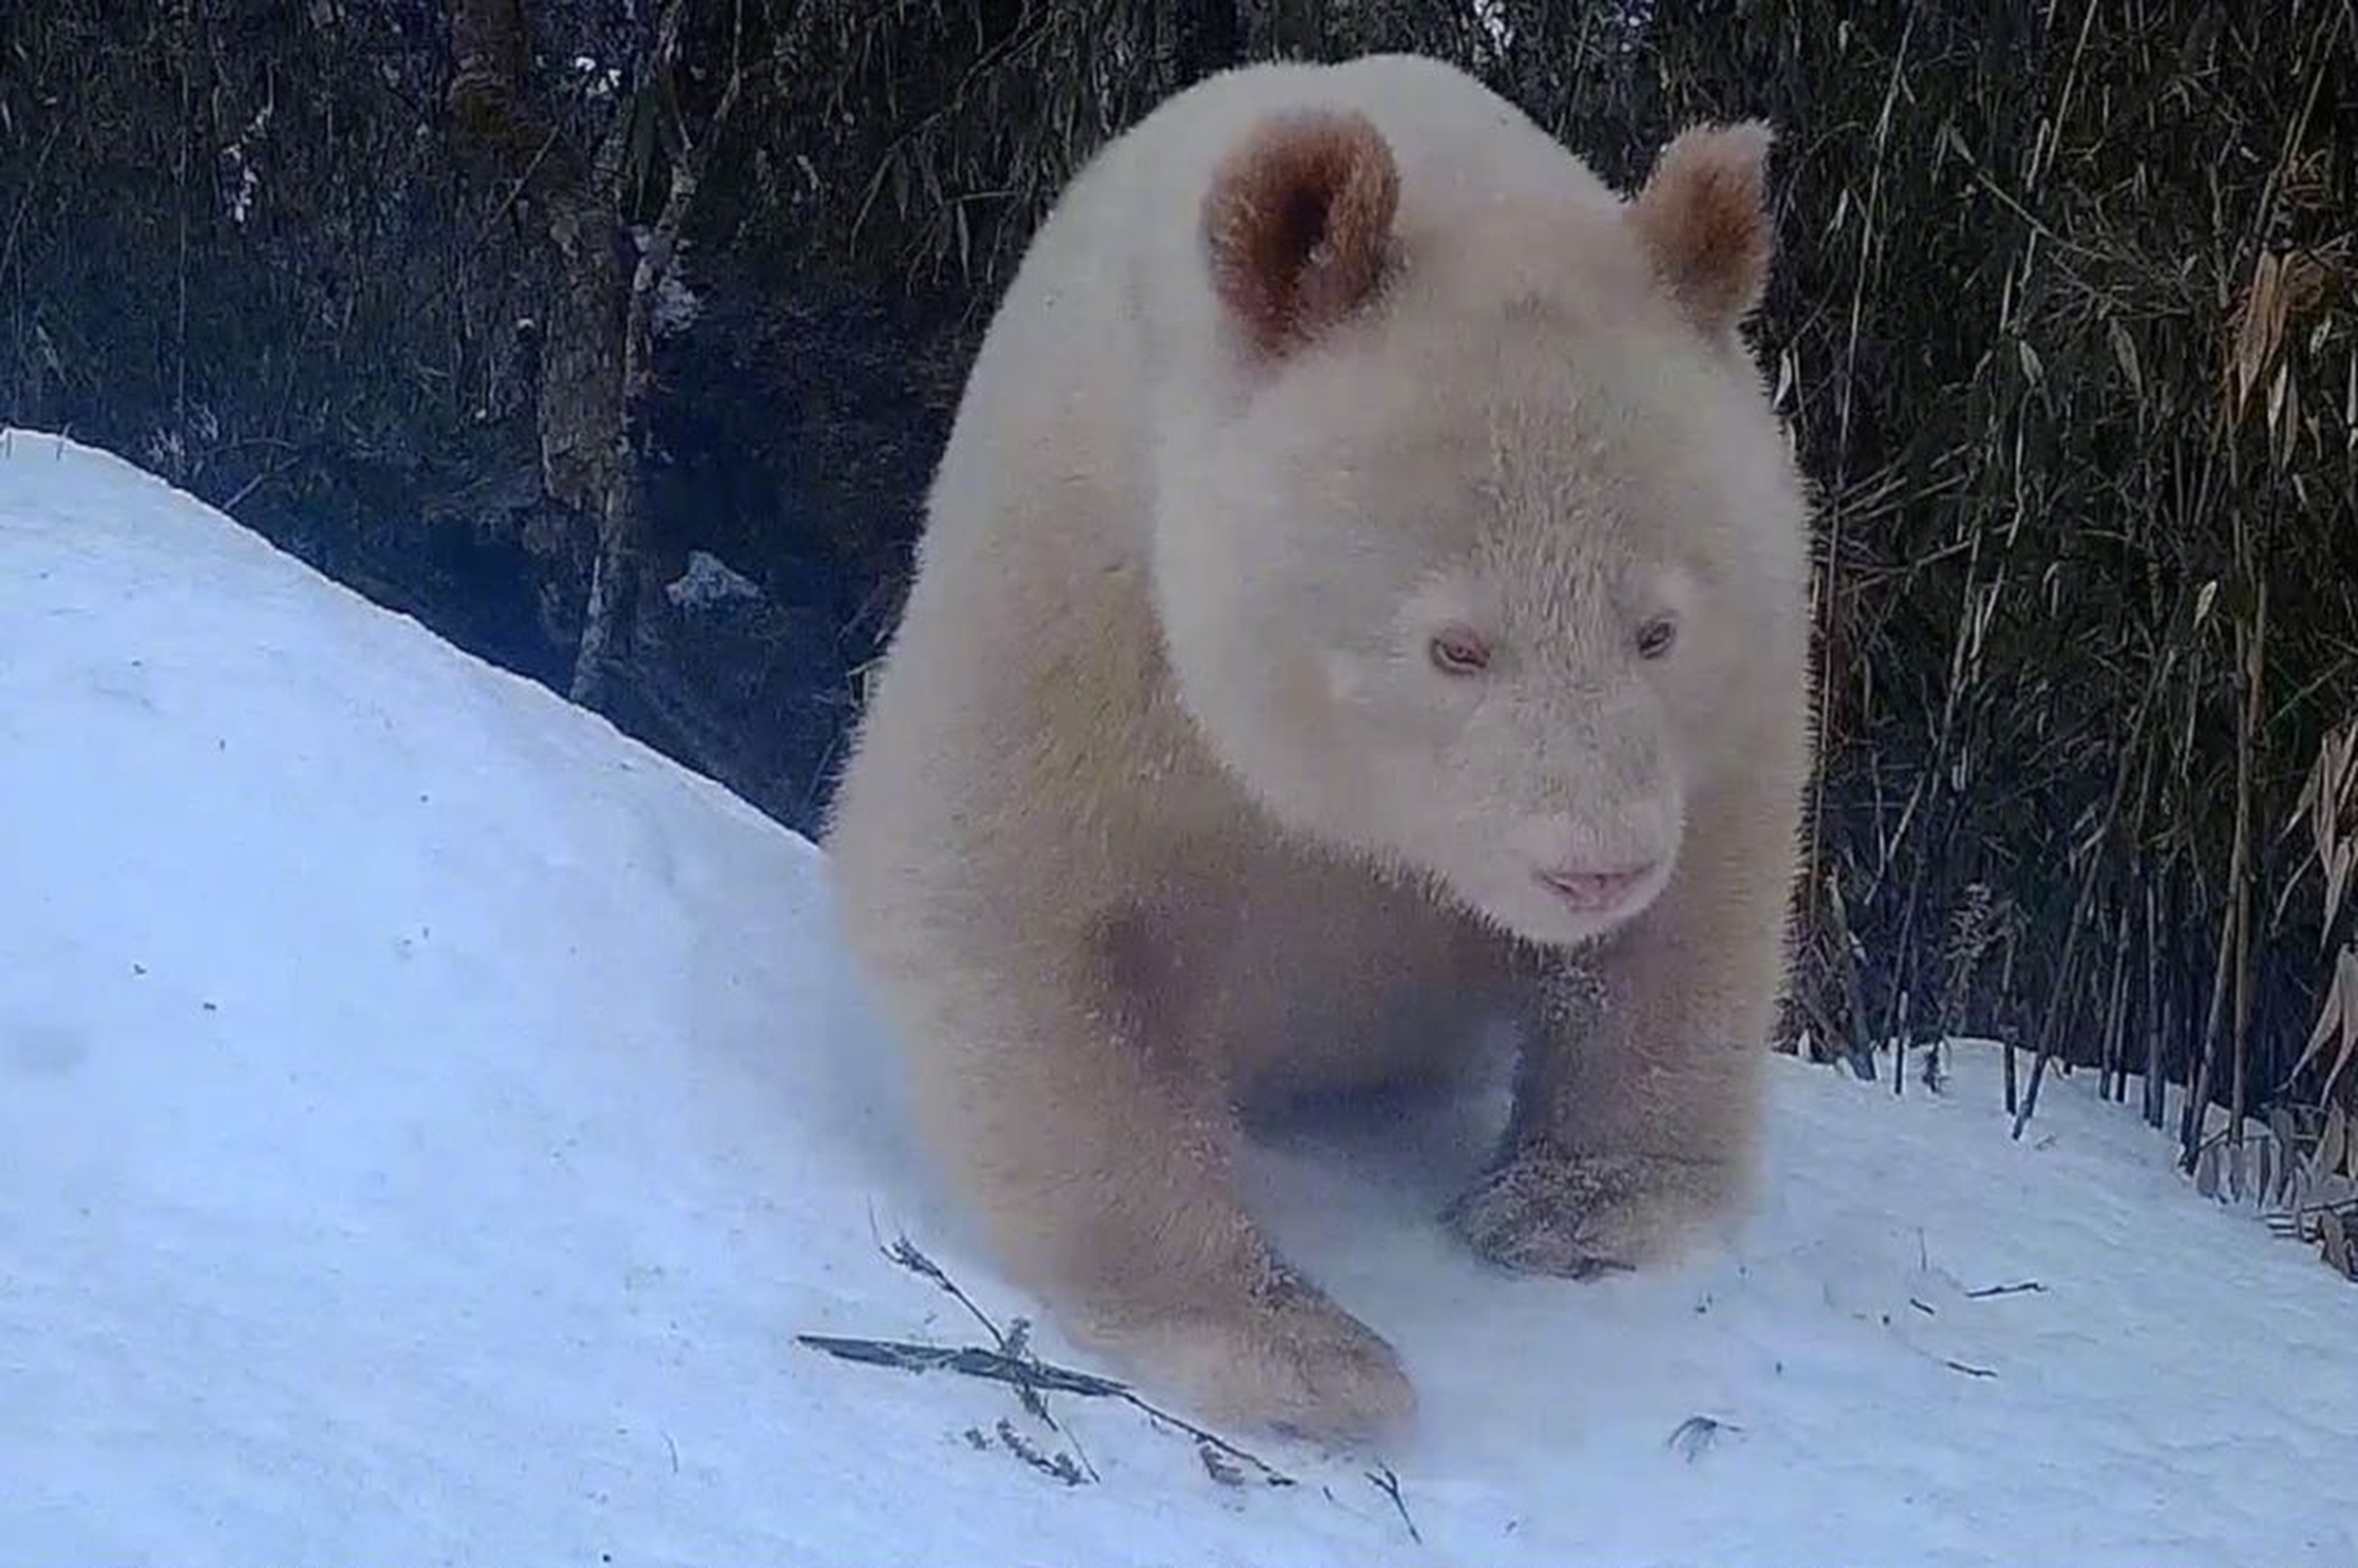 The albino giant panda is believed to be about five or six years old, and does not appear to be suffering from any health problems, according to China’s state broadcaster CCTV. Photo: Weibo 